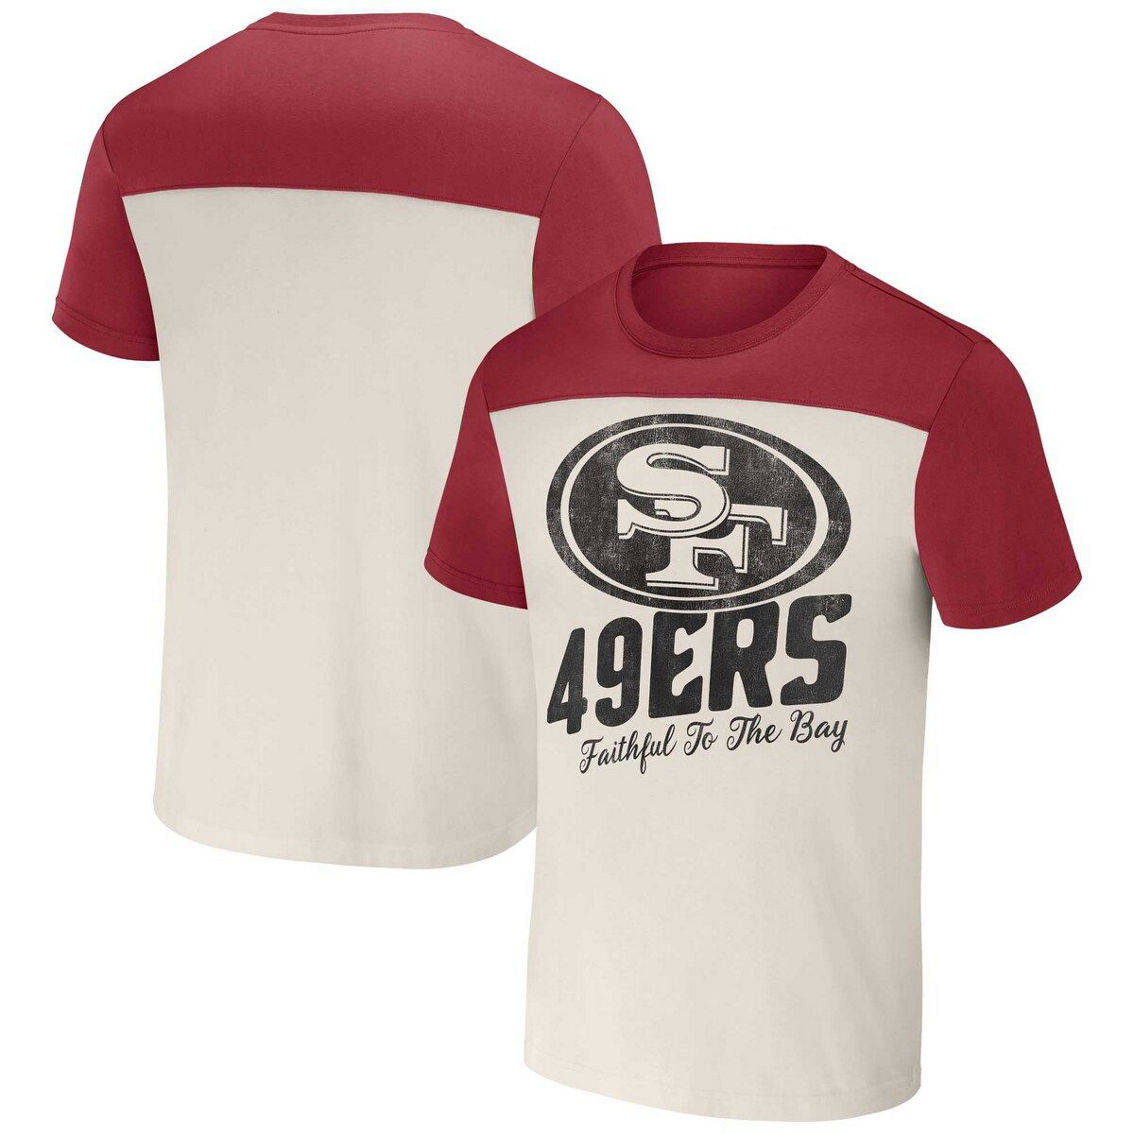 NFL x Darius Rucker Collection by Fanatics Men's Cream San Francisco 49ers Colorblocked T-Shirt - Image 2 of 4